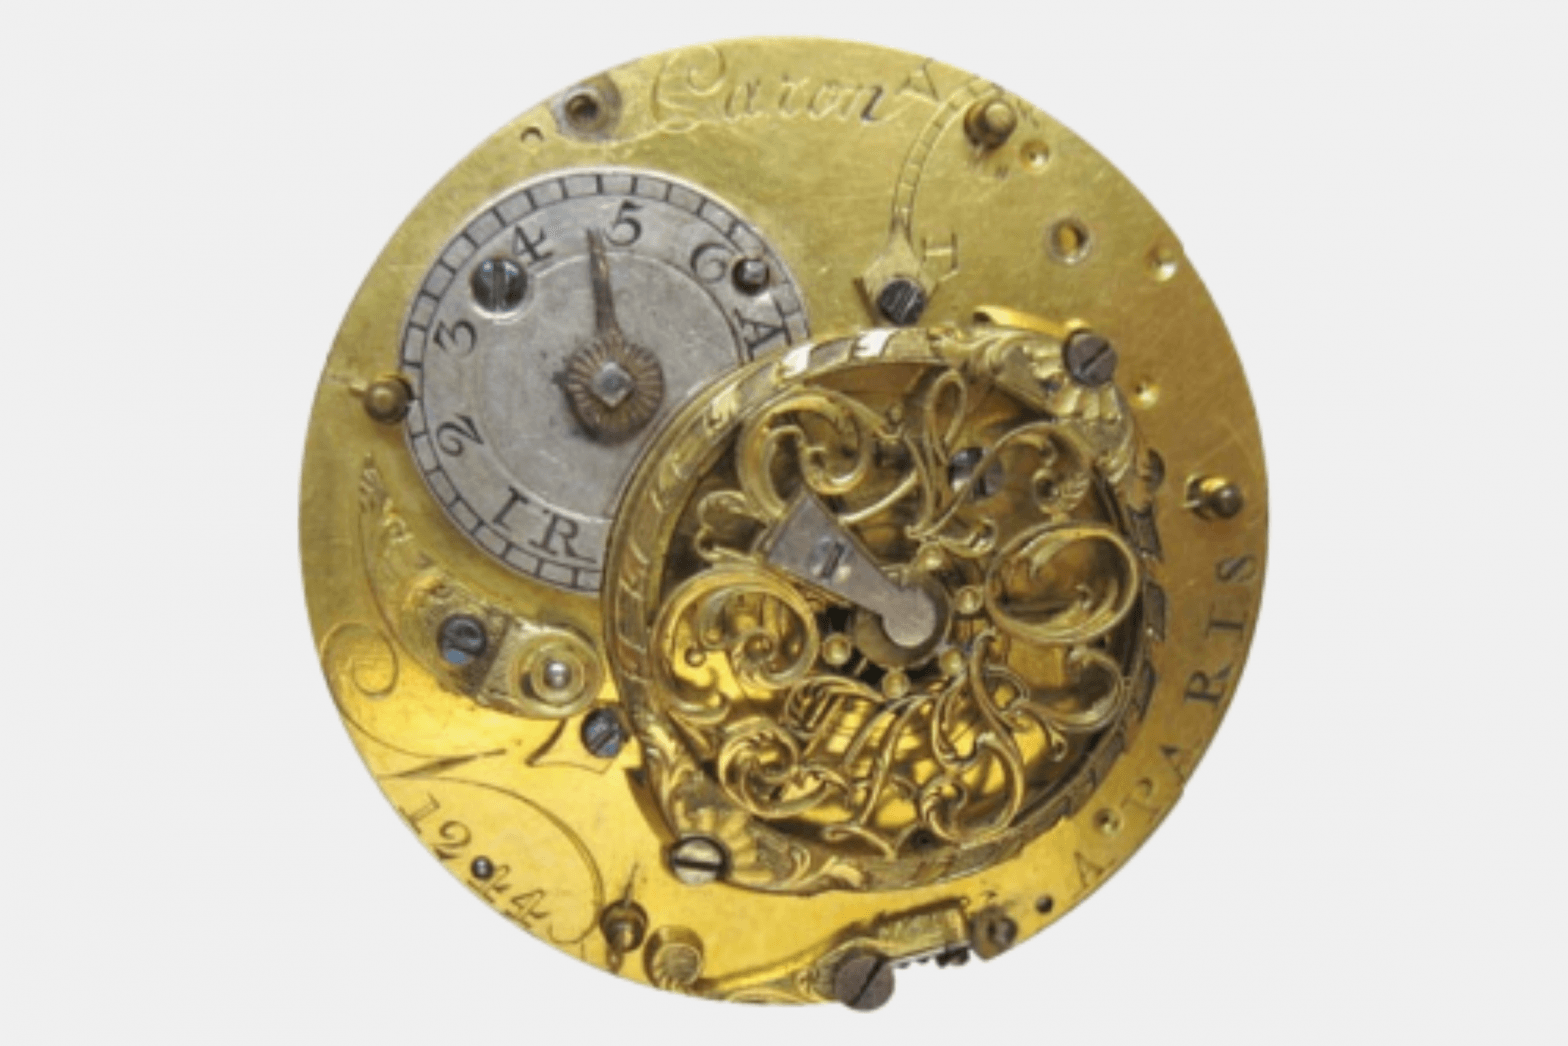 A view of the balance-cock side of the watch movement no. 1244 by André Charles Caron, circa 1750.